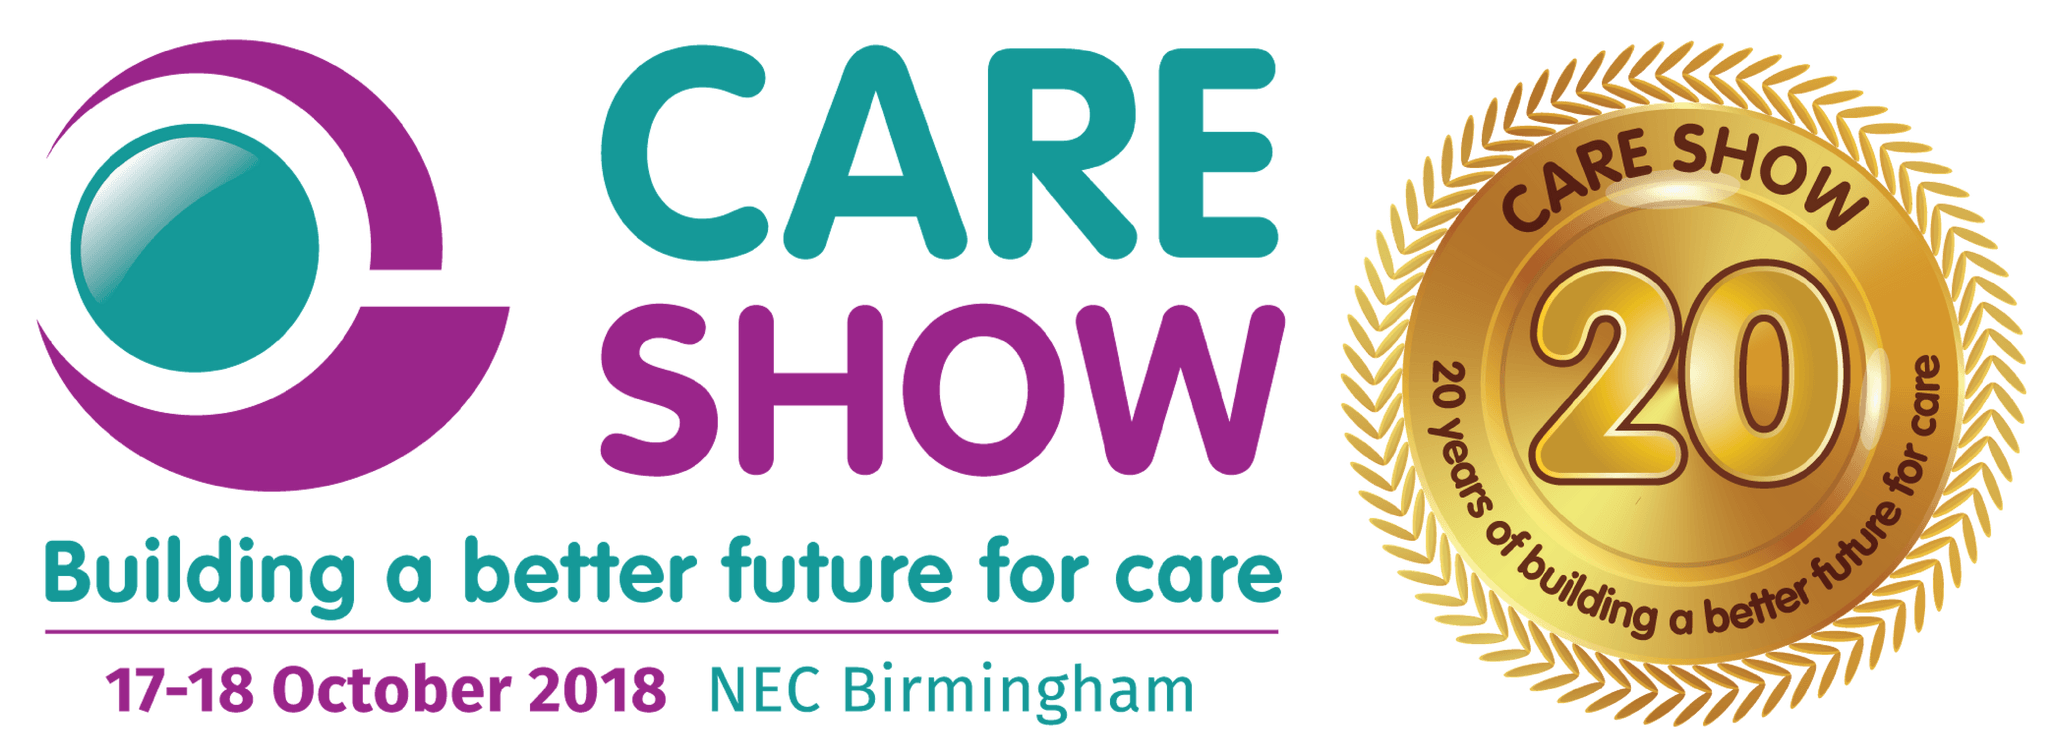 Care Show to Welcome Thousands of Care Professionals to Birmingham